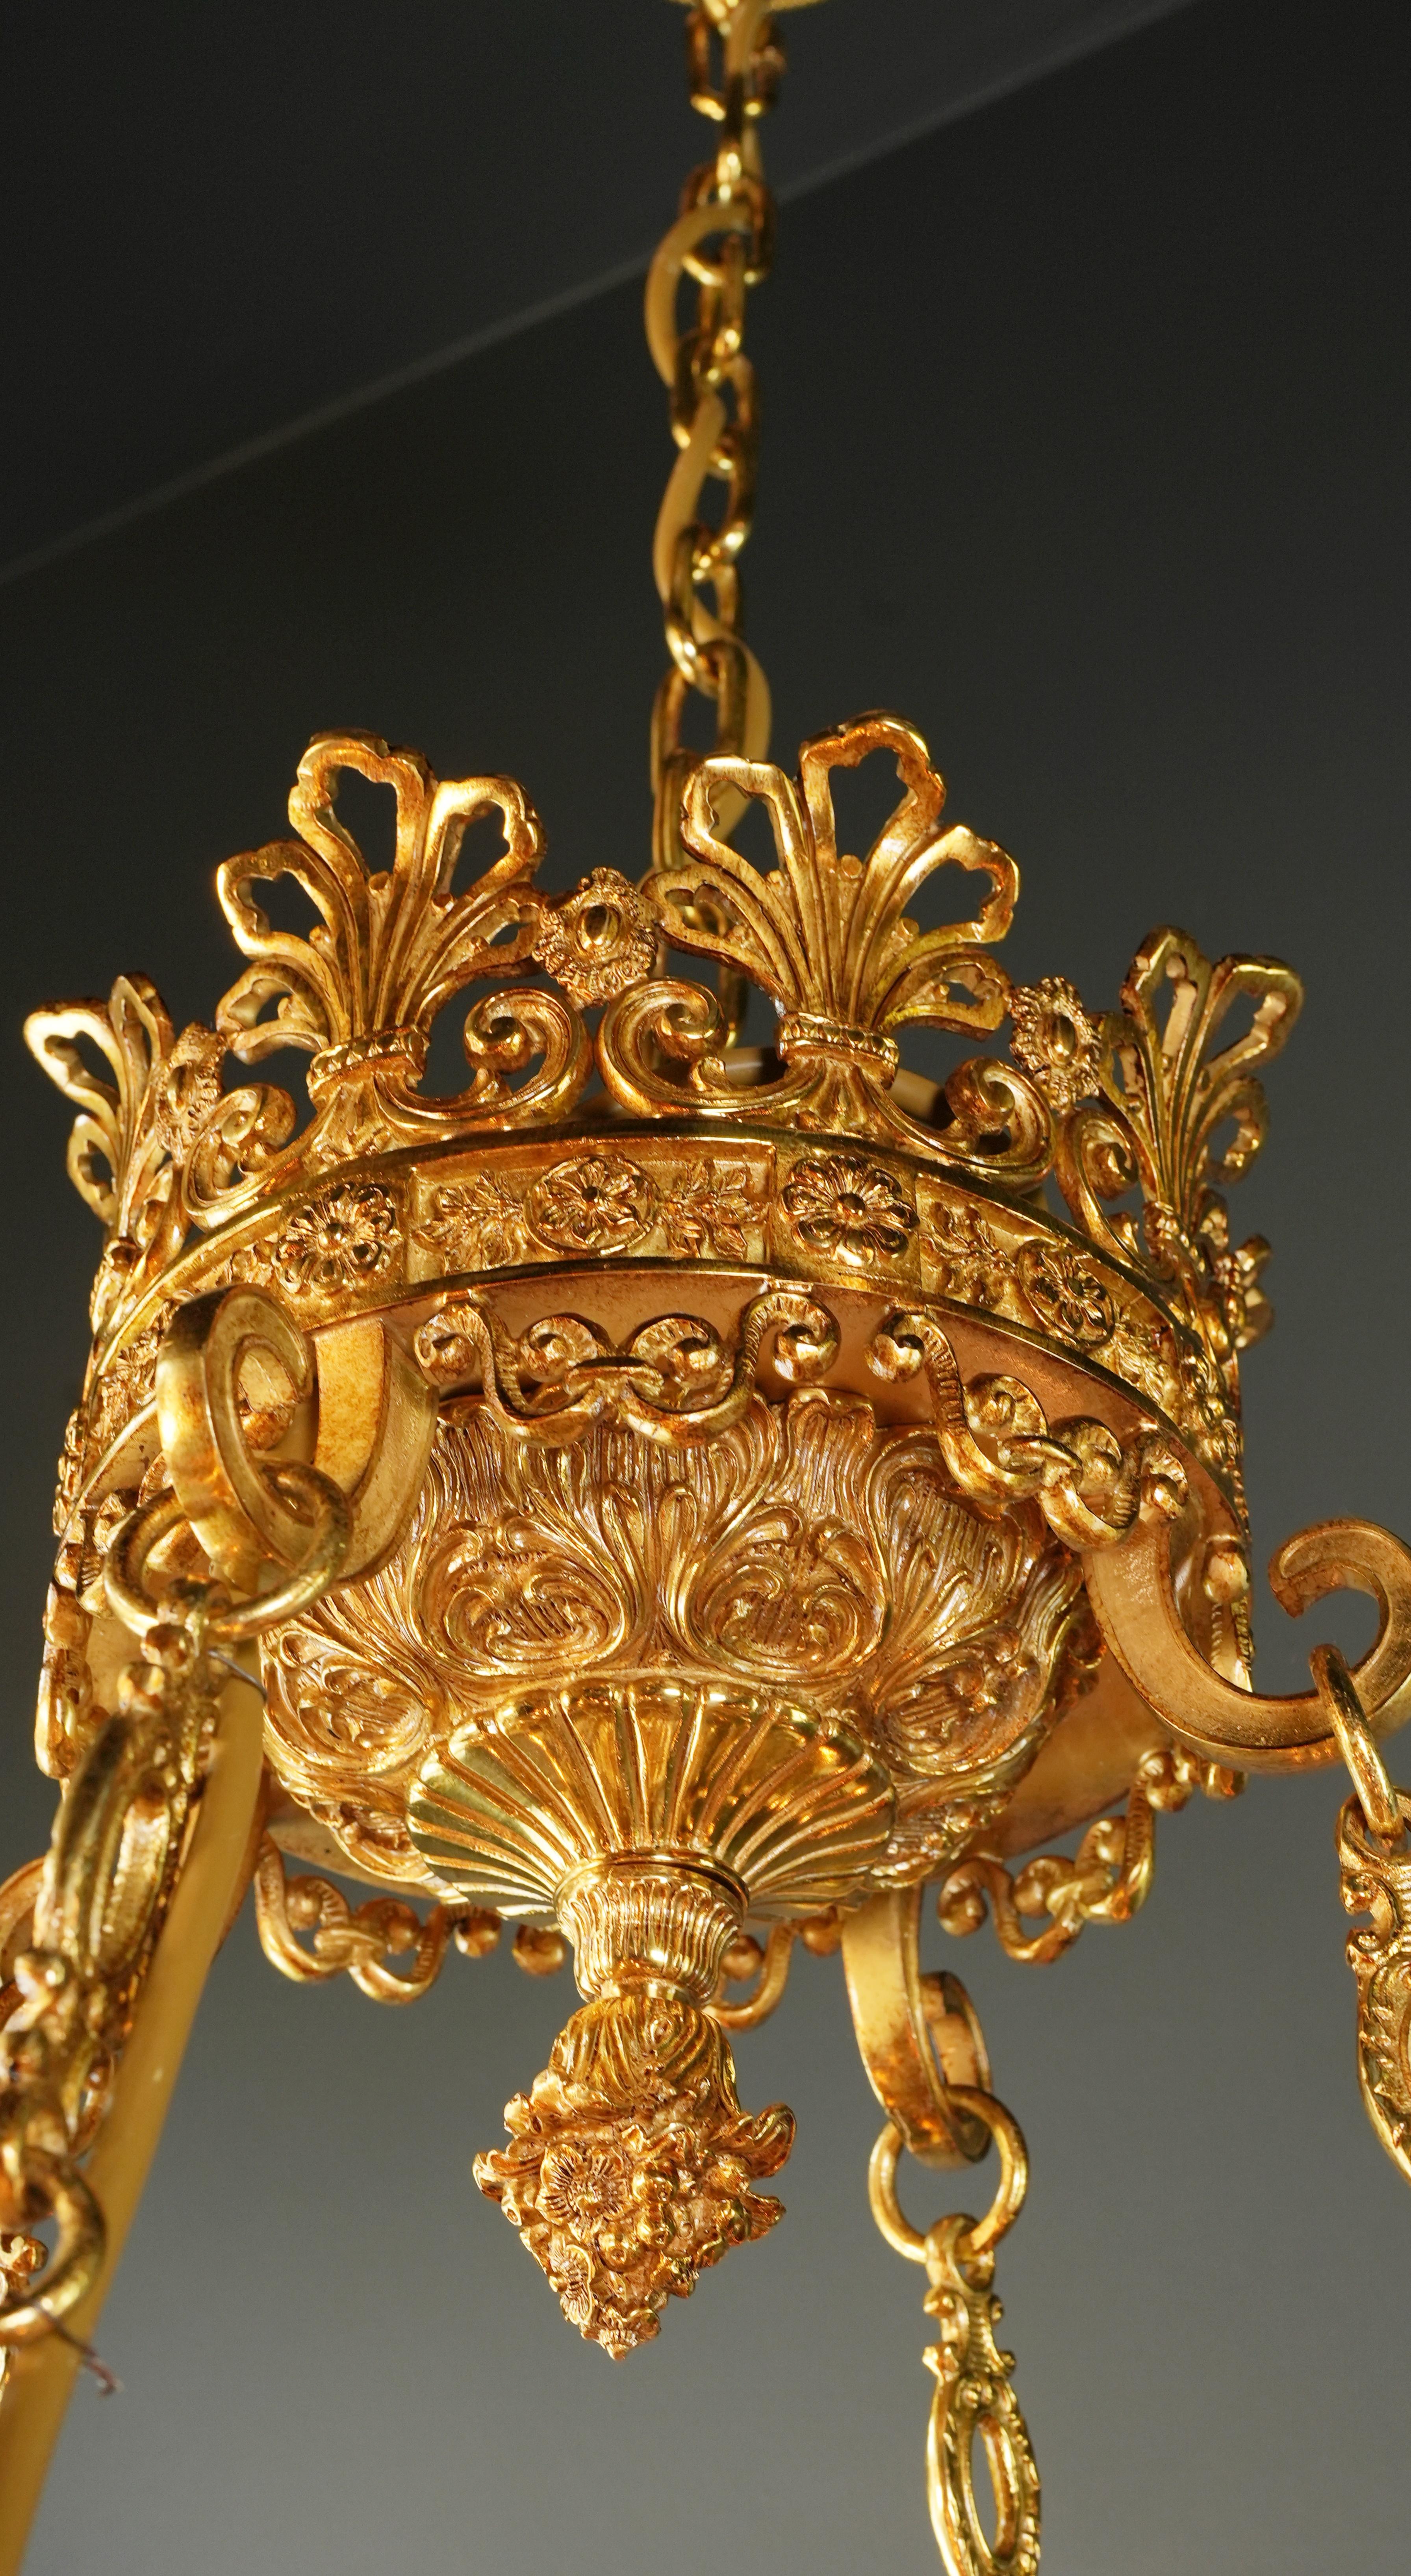 21st Century Baroque Brass Empire Chandelier Crystal Lustre Lamp Antique Gold  For Sale 5